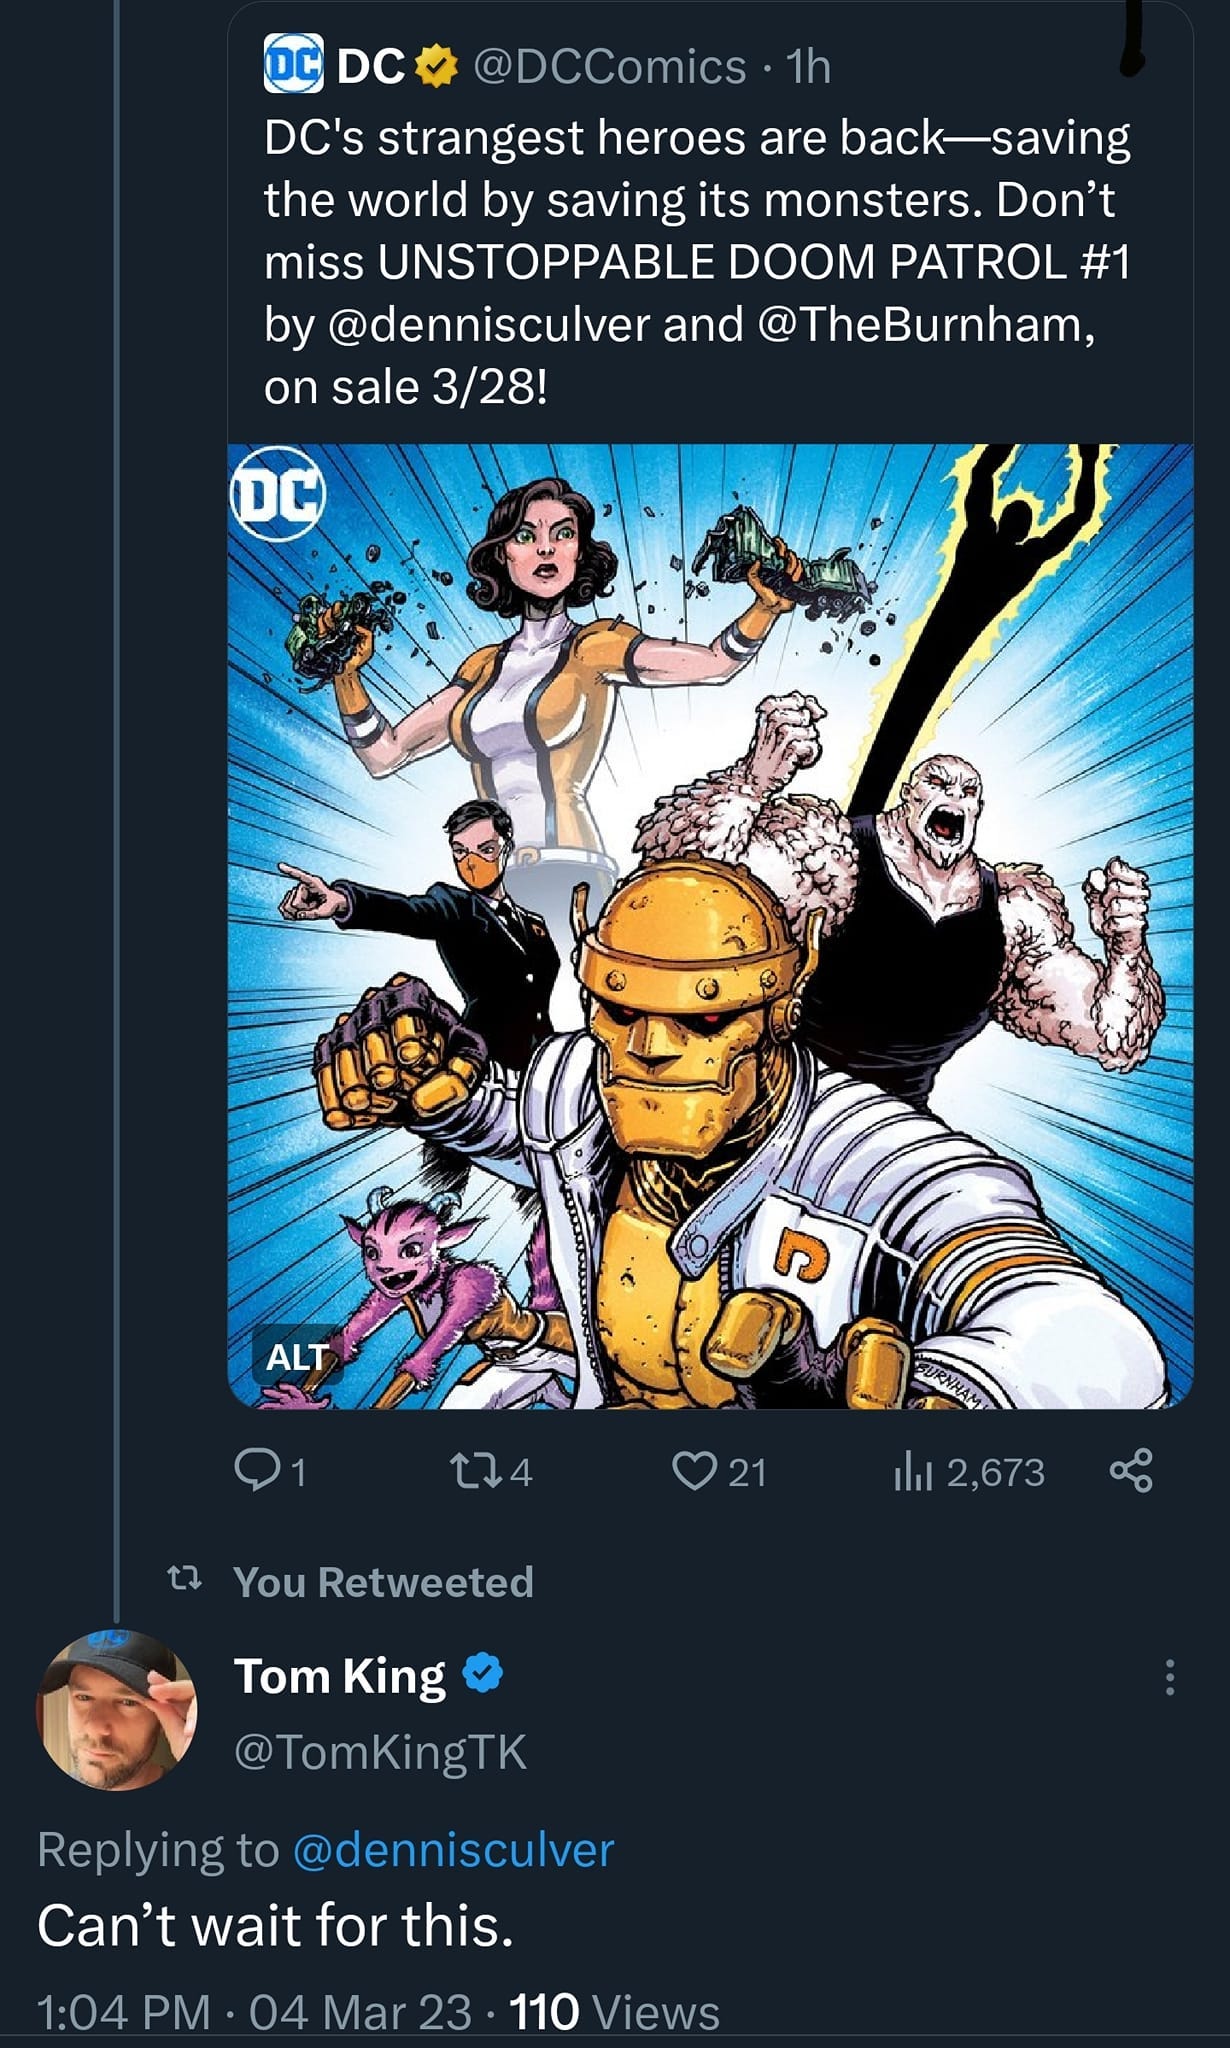 May be an image of 1 person and text that says 'DC @DCComics DC's strangest heroes are back-saving the world by saving its monsters. Don't miss UNSTOPPABLE DOOM PATROL #1 by @dennisculver and @TheBurnham, on sale 3/28! DC ALT × 174 21 You Retweeted |12,673 ထိ Tom King @TomKingTK Replying to @dennisculver Can't wait for this. 1:04 PM 04 Mar 23 110 Views'